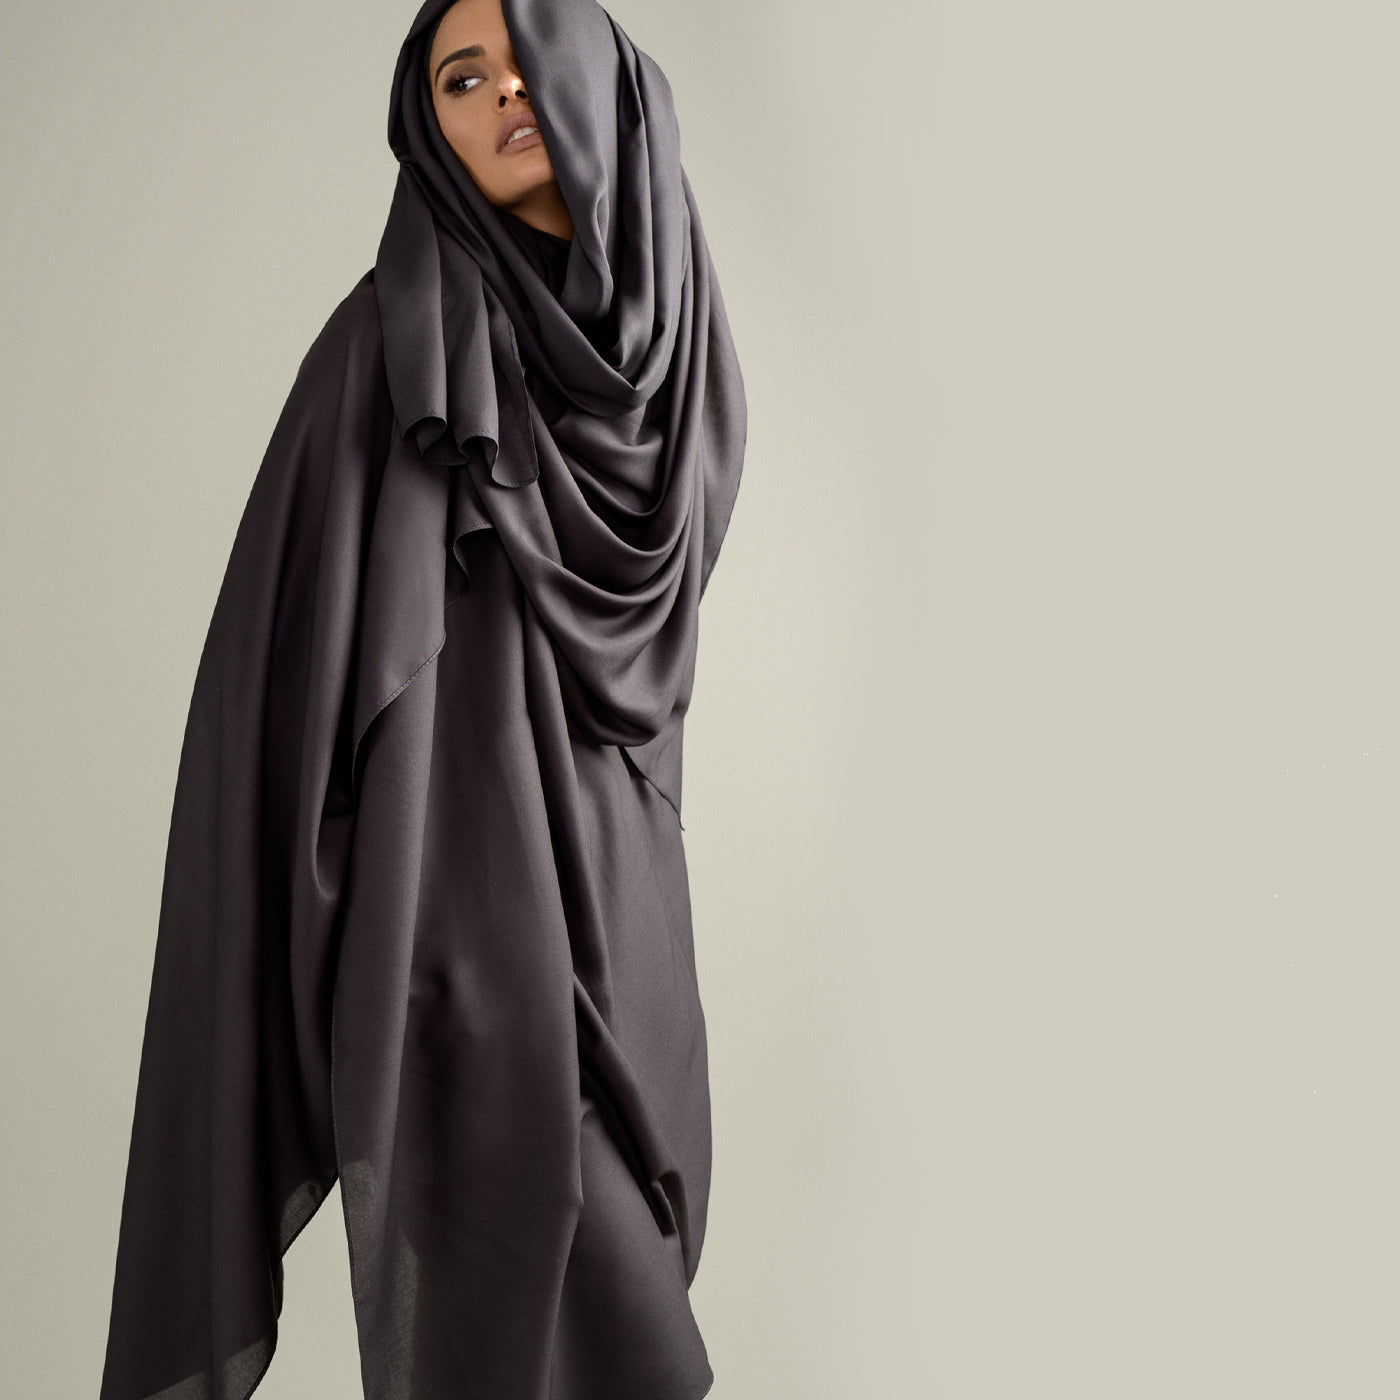 Why we only design large-sized hijabs